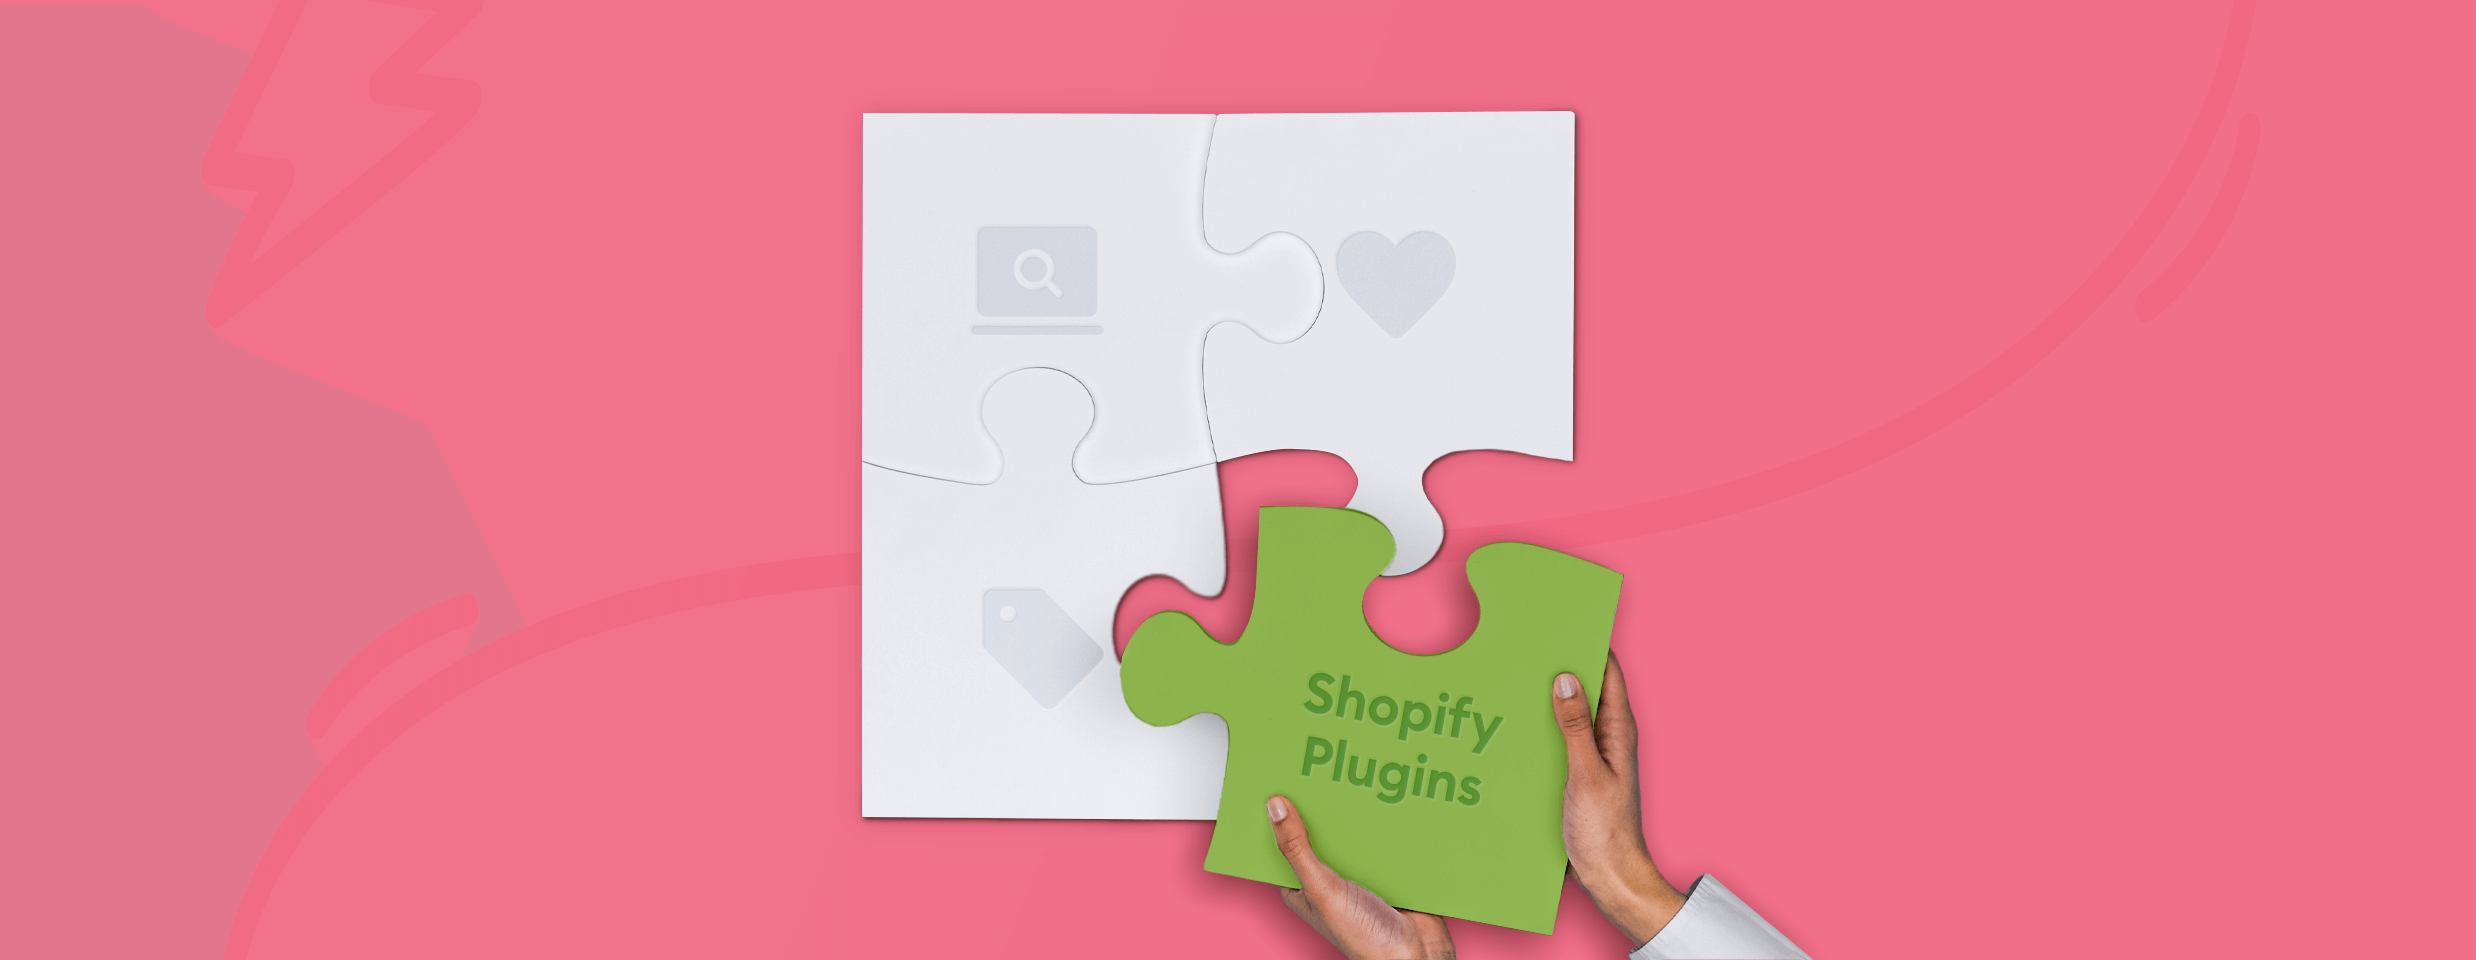 shopify plugins cover photo